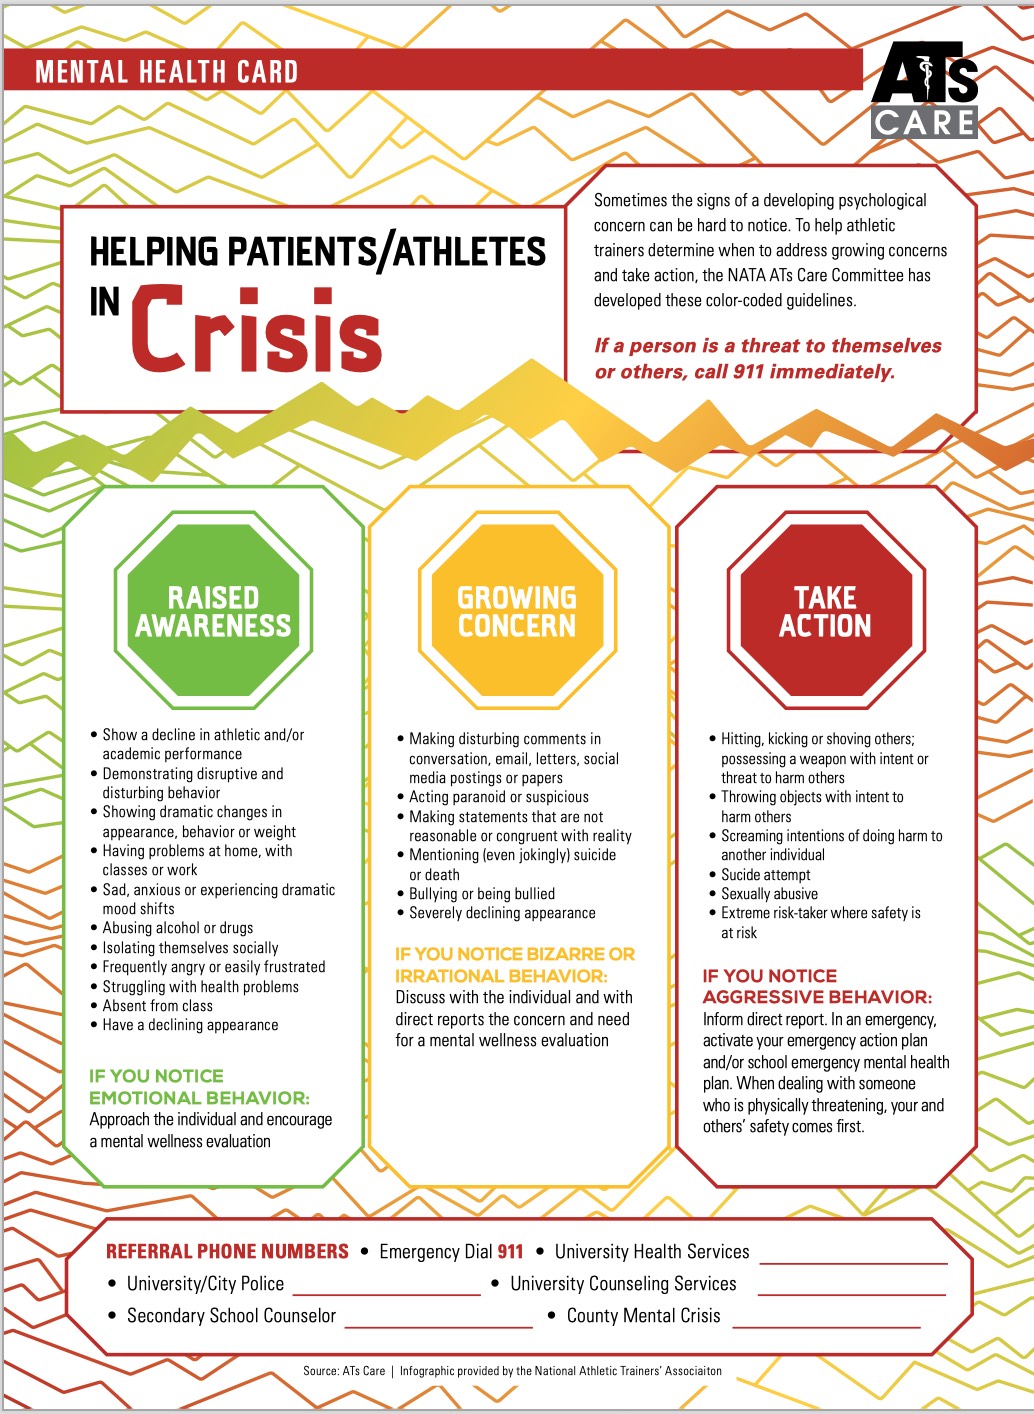 Mental Health Card: Helping Athletes/Patients in Crisis